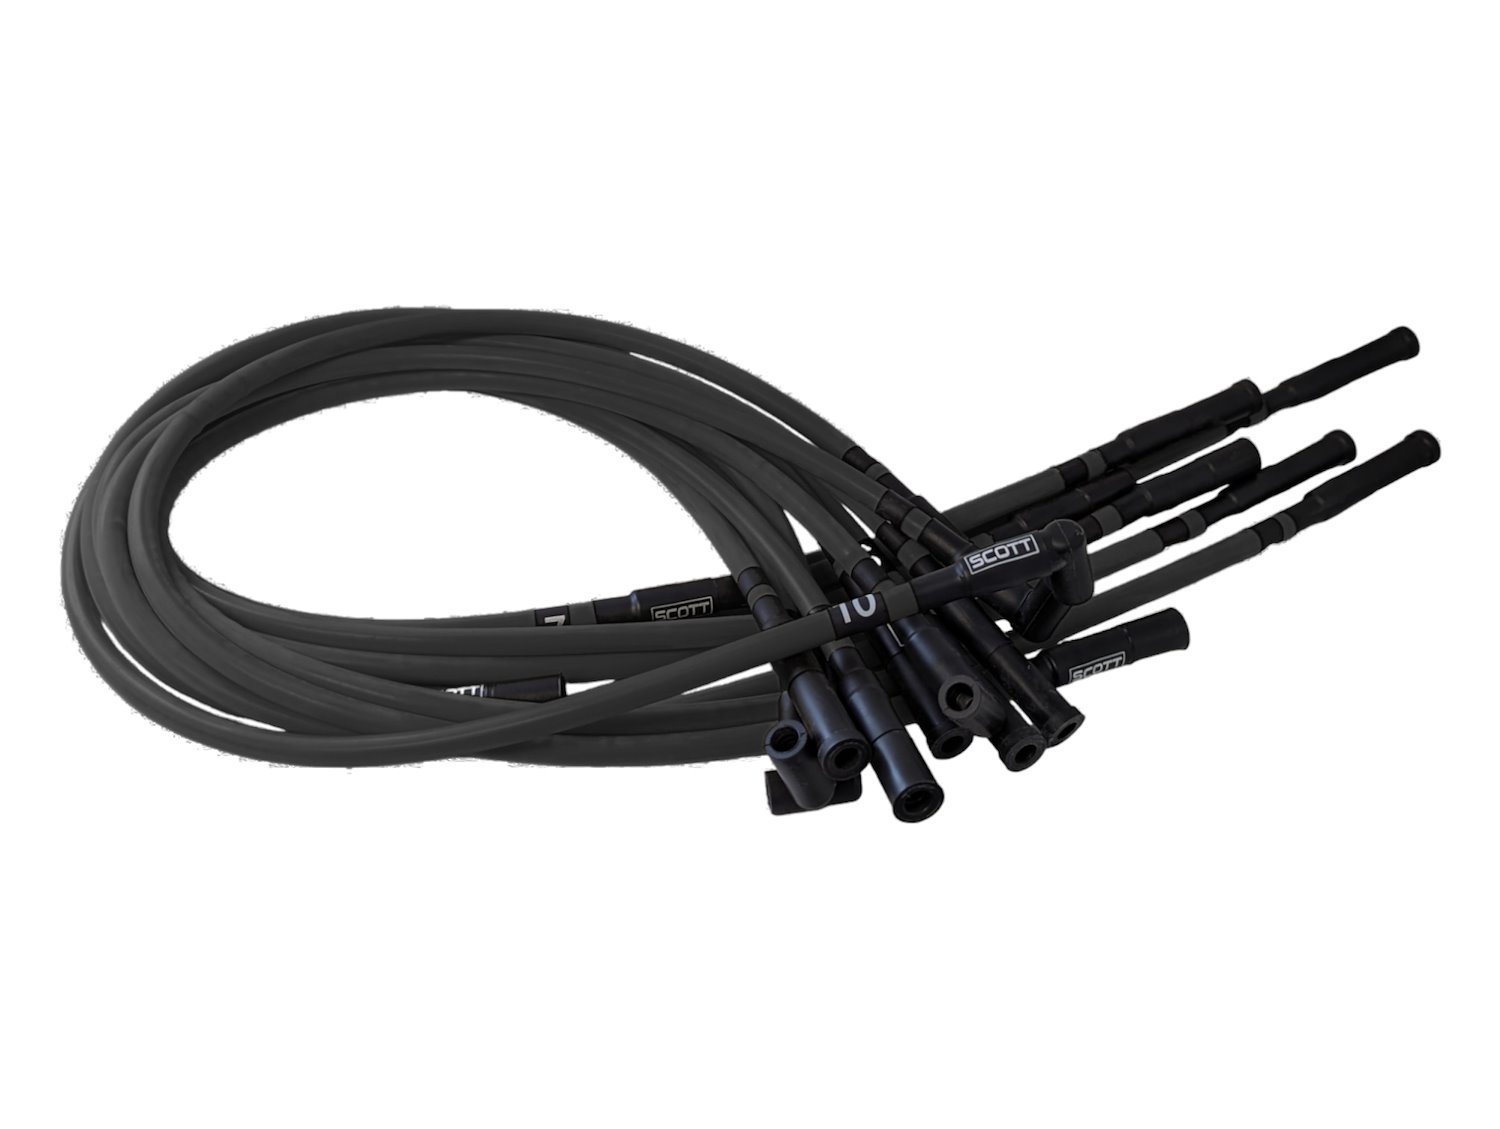 SPW-CH-690-II-1 High-Performance Silicone-Sleeved Spark Plug Wire Set for Dodge Viper (Gen-2) [Black]